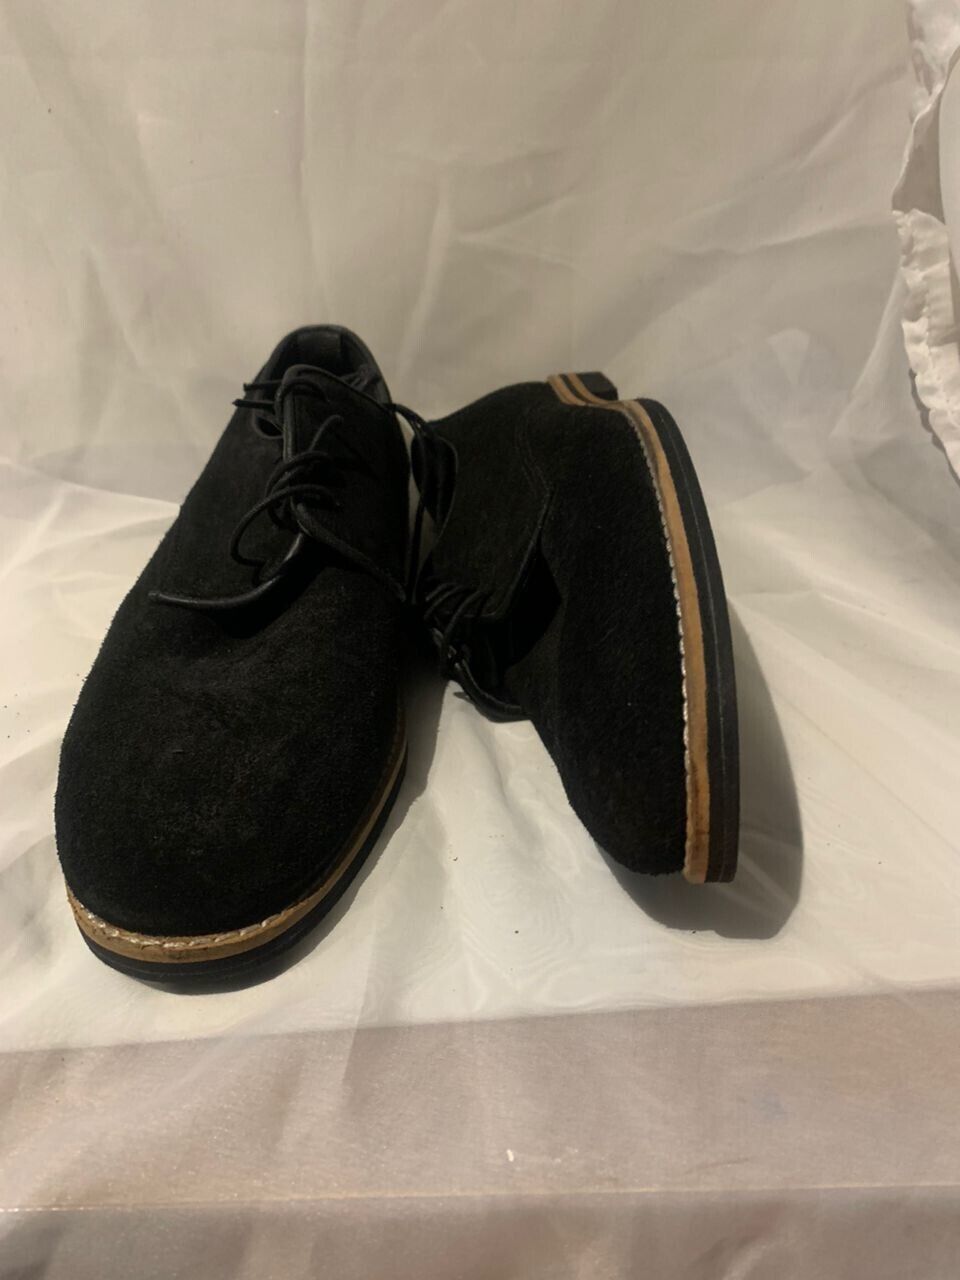 Primary image for Asos Black Shoes Suede Size 7 Mens Express Shipping